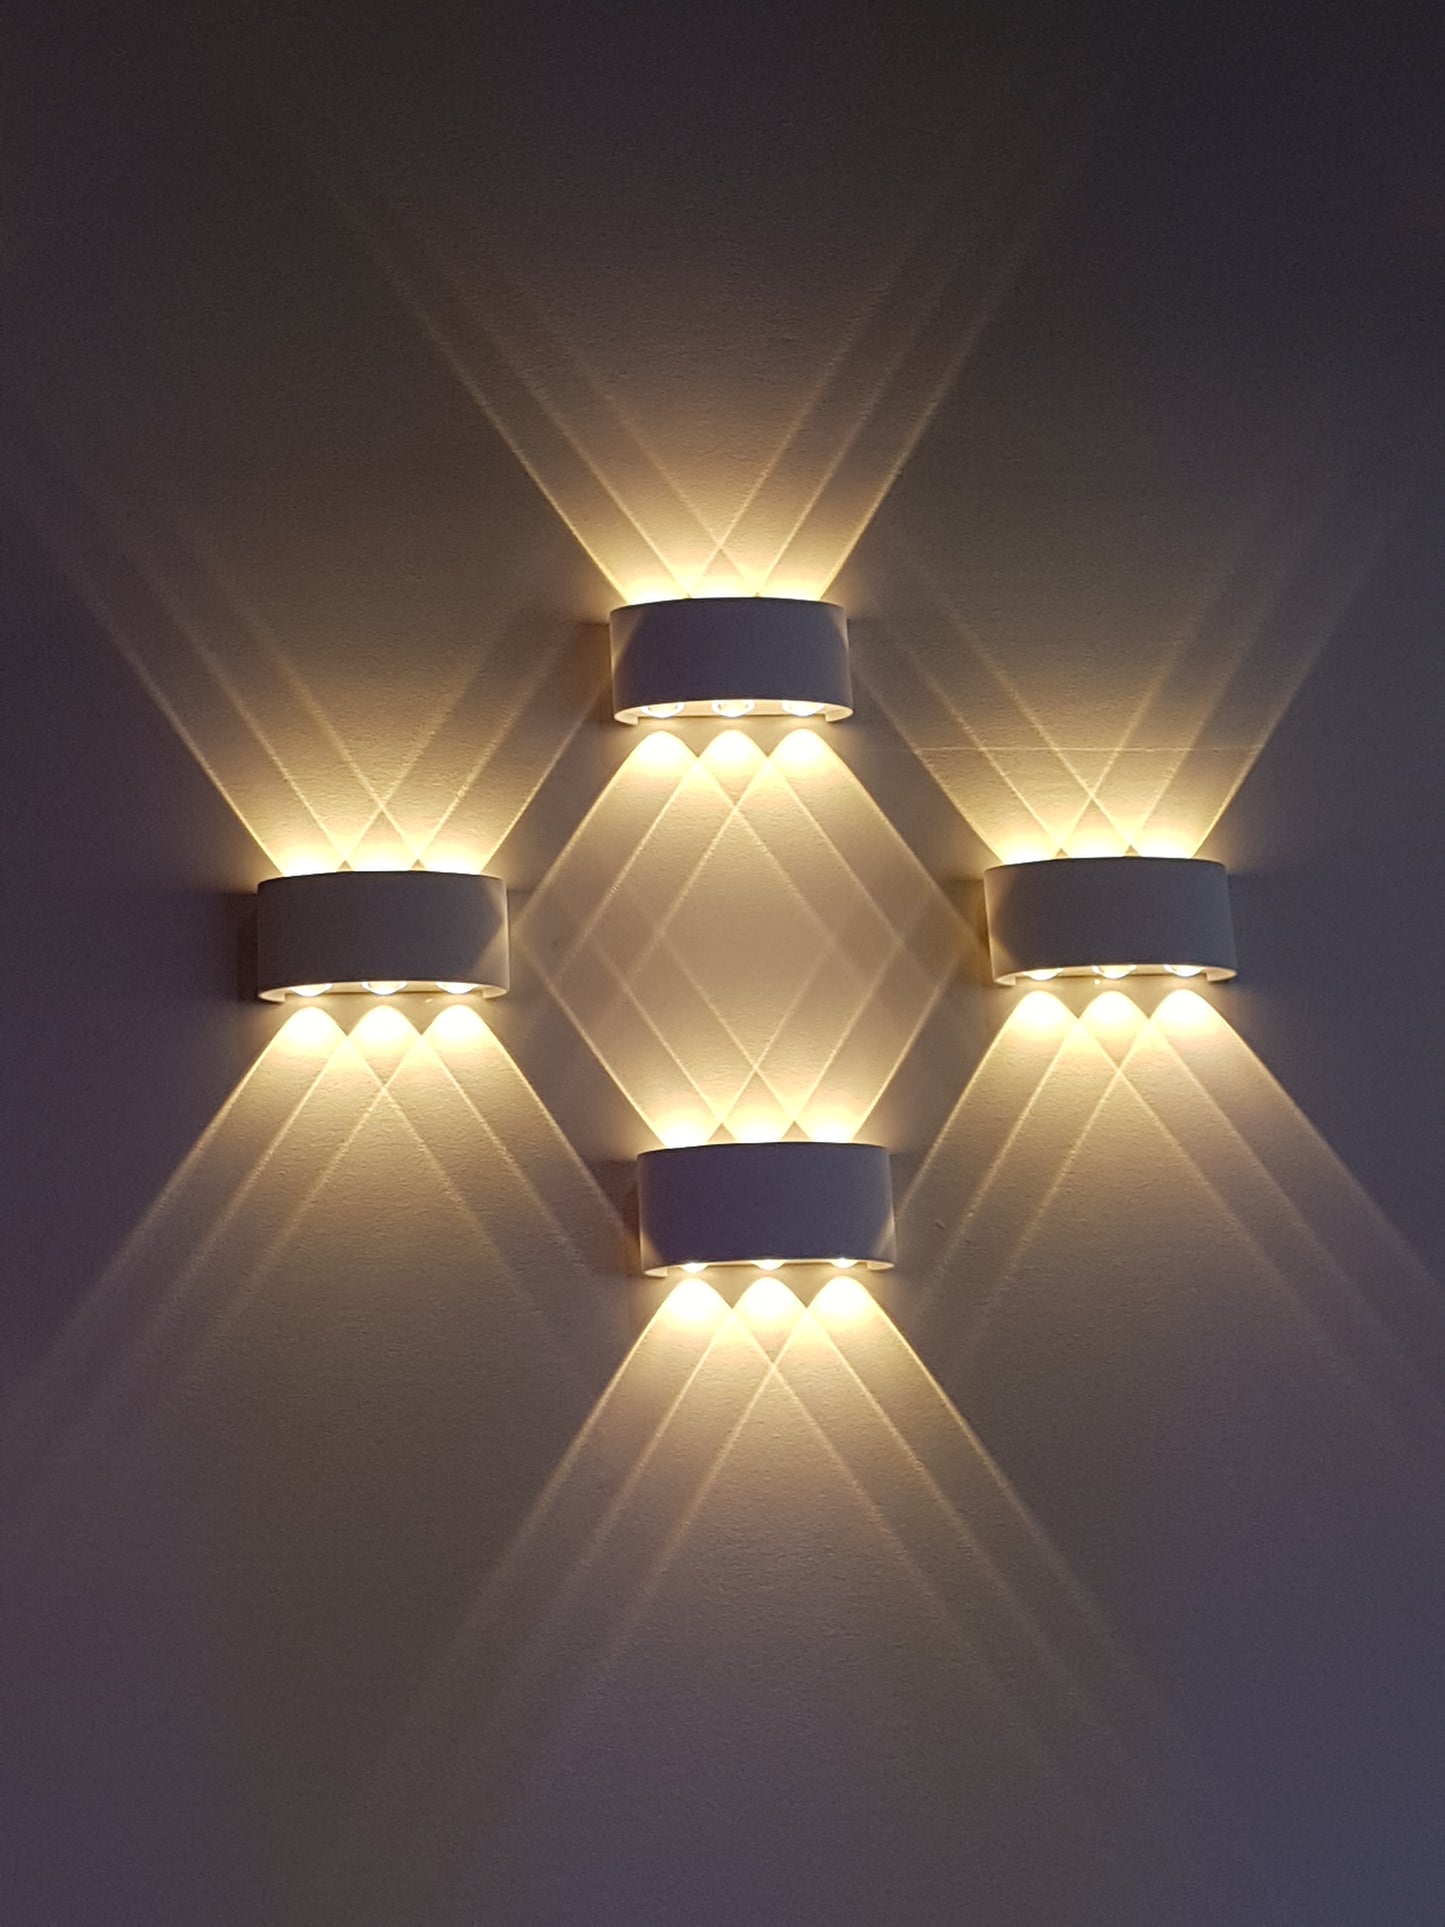 Wall Light, Up and down Light, Decorative light, ambient light, 240V AC, 6X1W, IP54, 2700K, Sand White